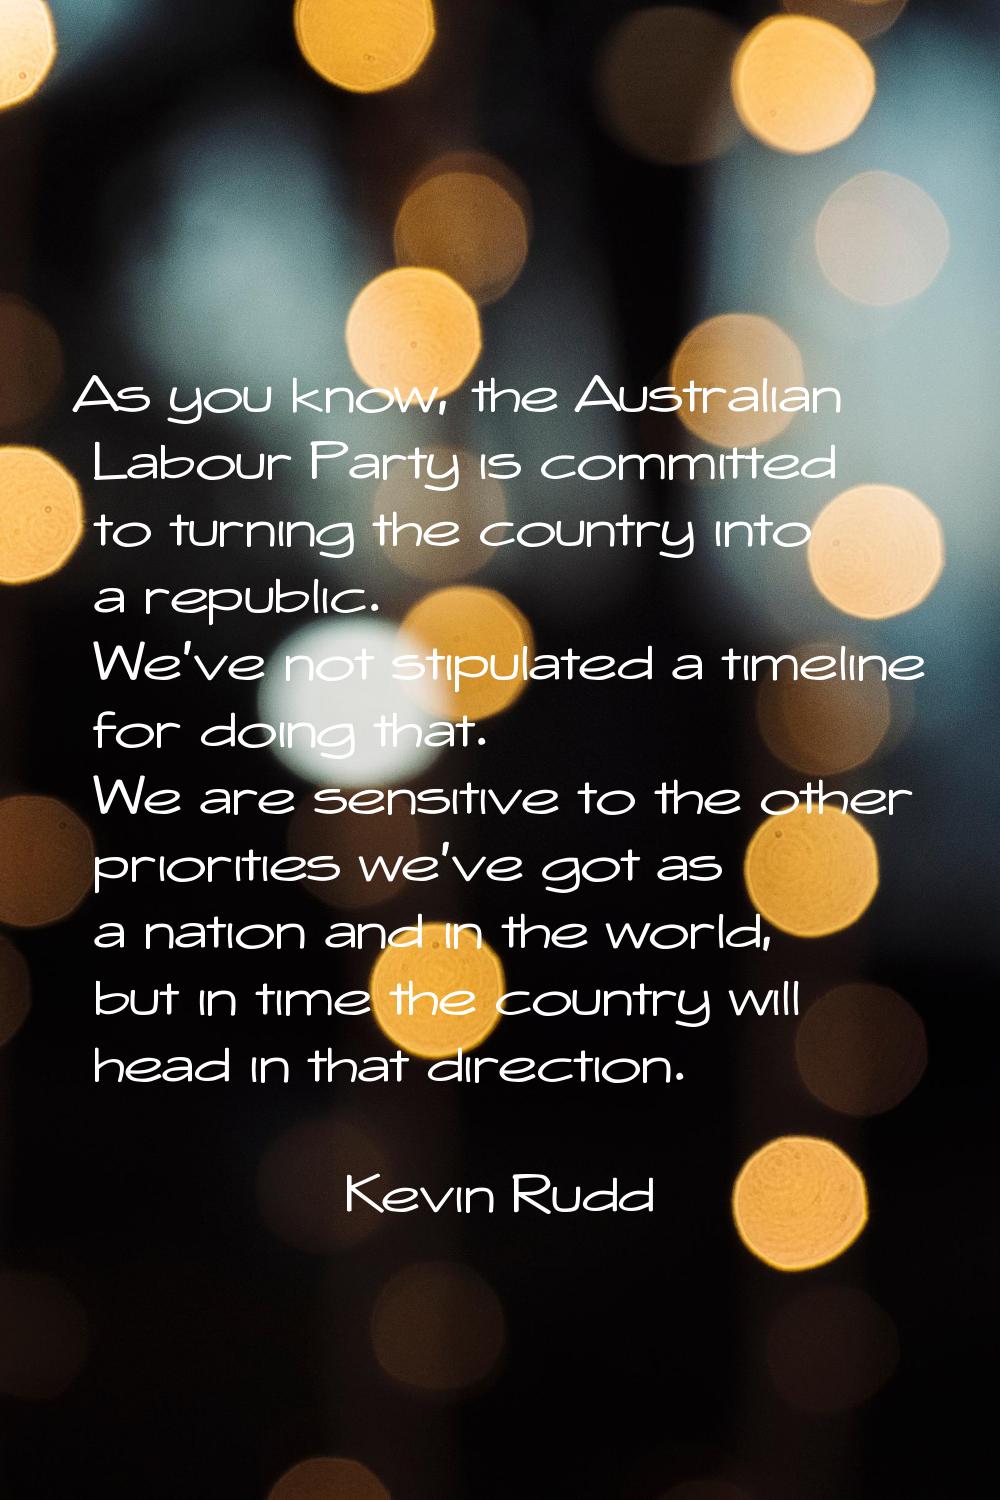 As you know, the Australian Labour Party is committed to turning the country into a republic. We've